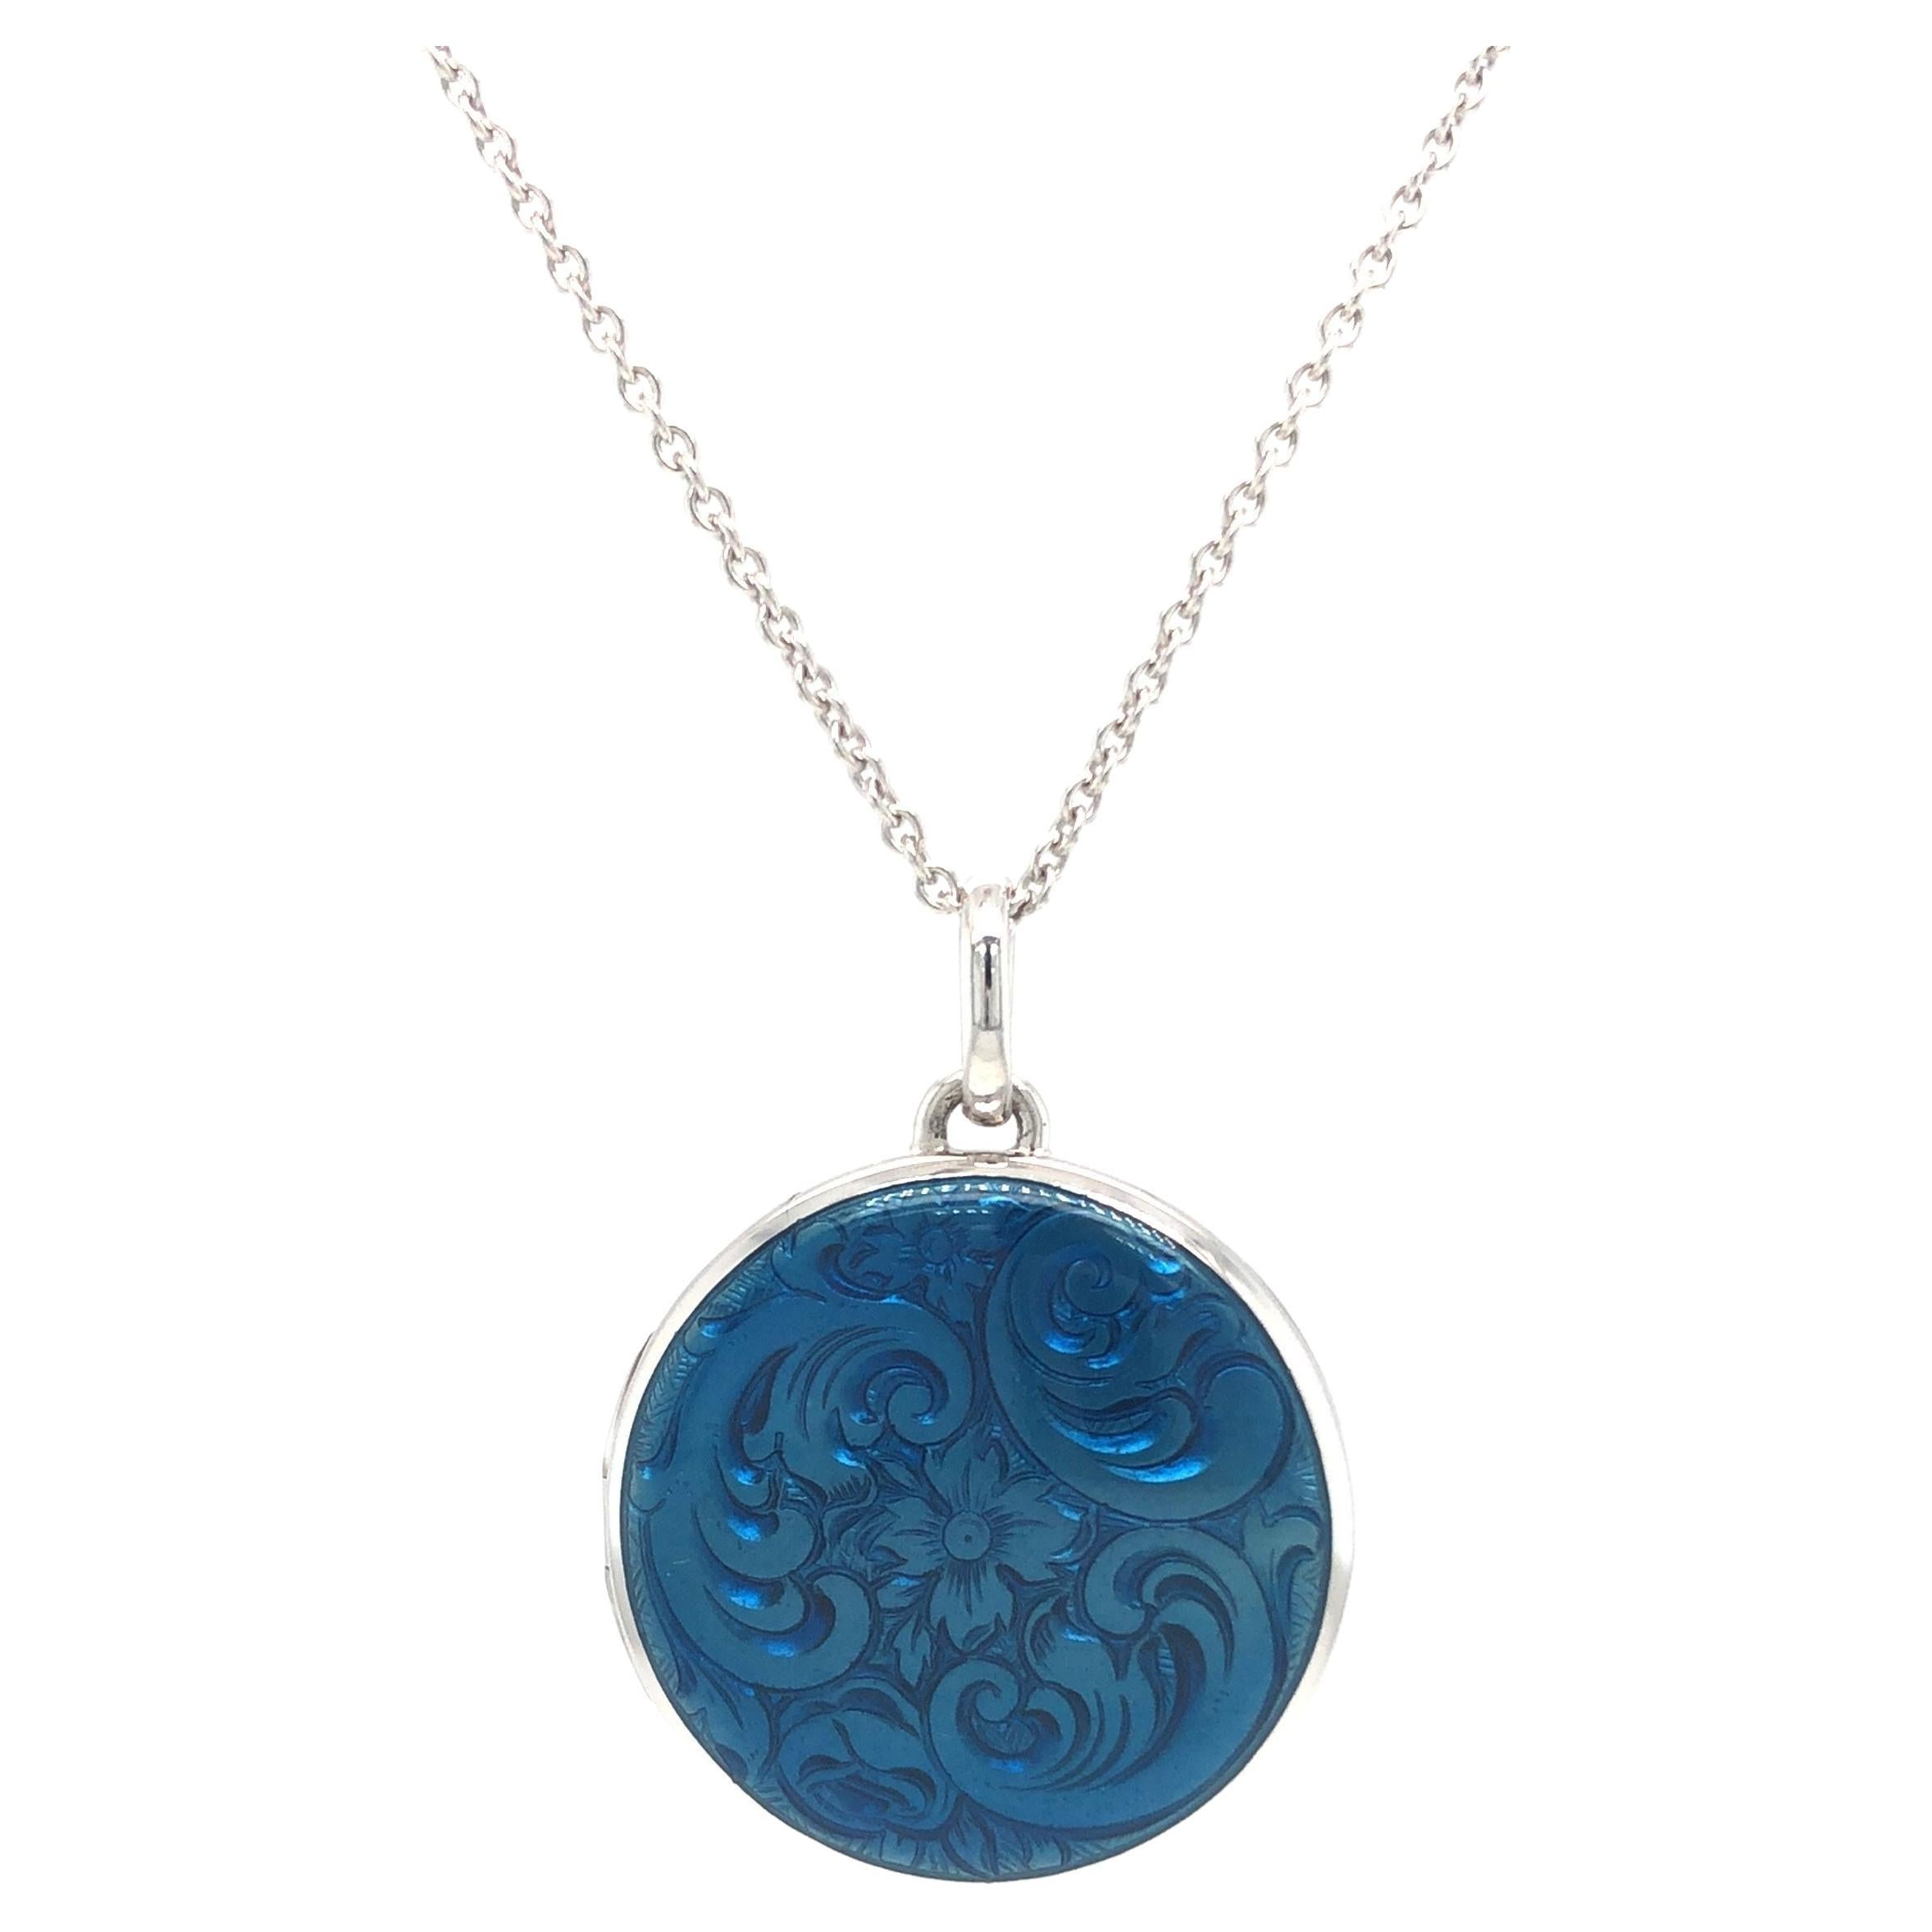 Round Locket Pendant Necklace White Gold Blue Fire Enamel over Scroll Engraving